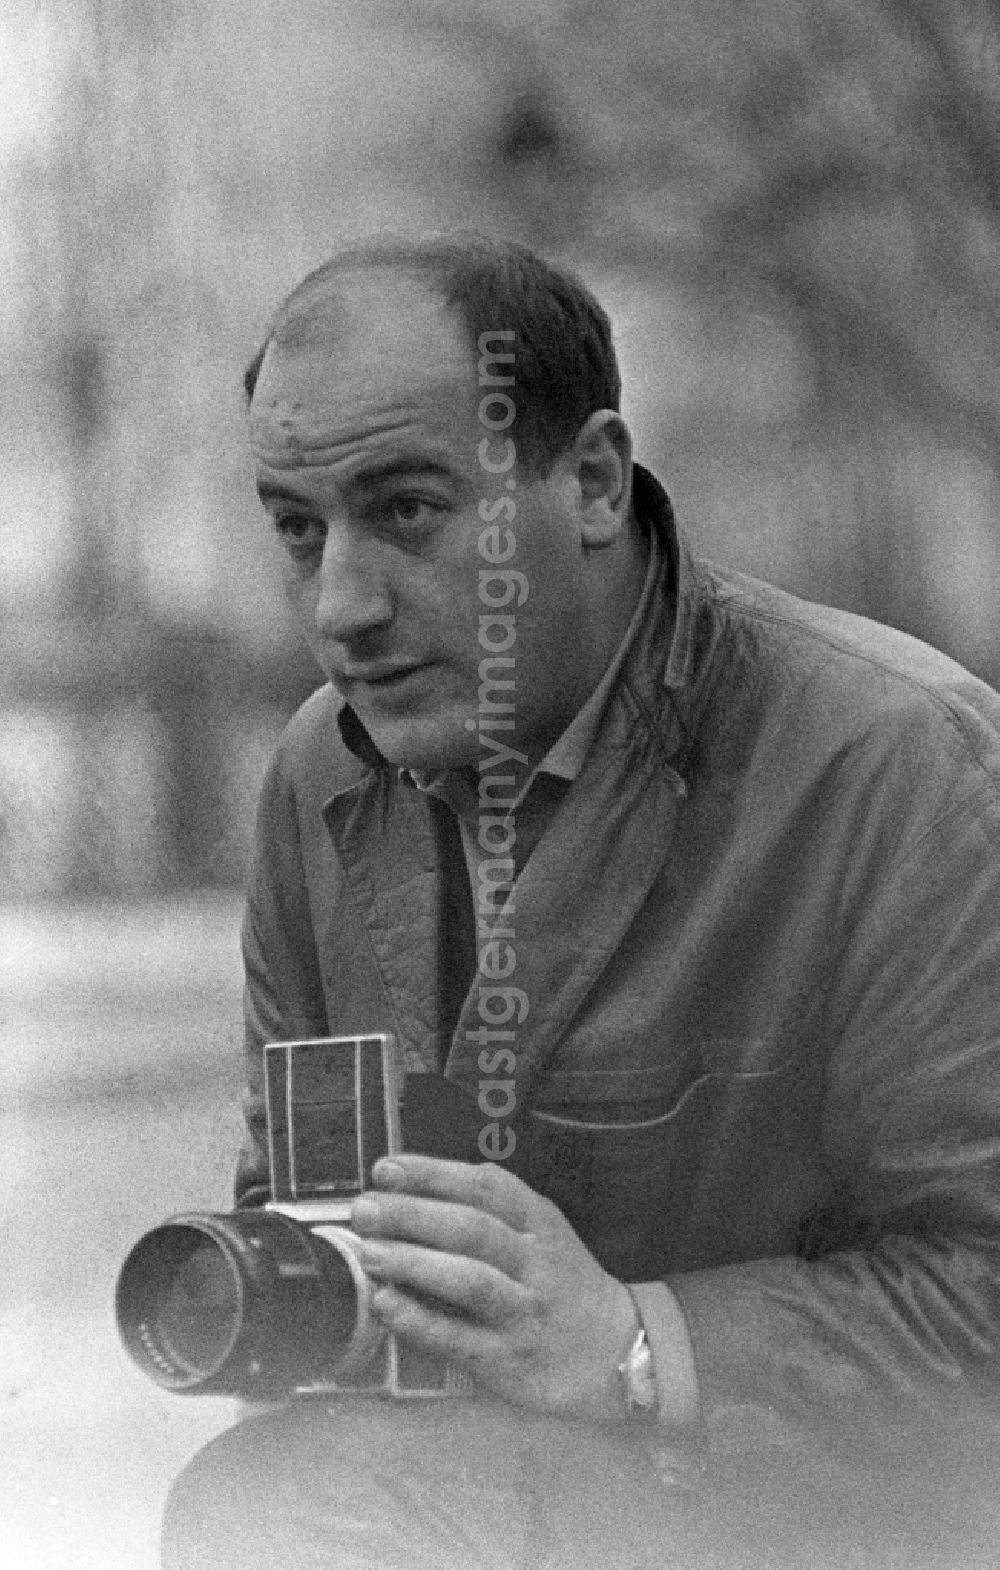 GDR photo archive: Berlin - Actor - portrait Manfred Krug in the district Mitte in Berlin, the former capital of the GDR, German Democratic Republic